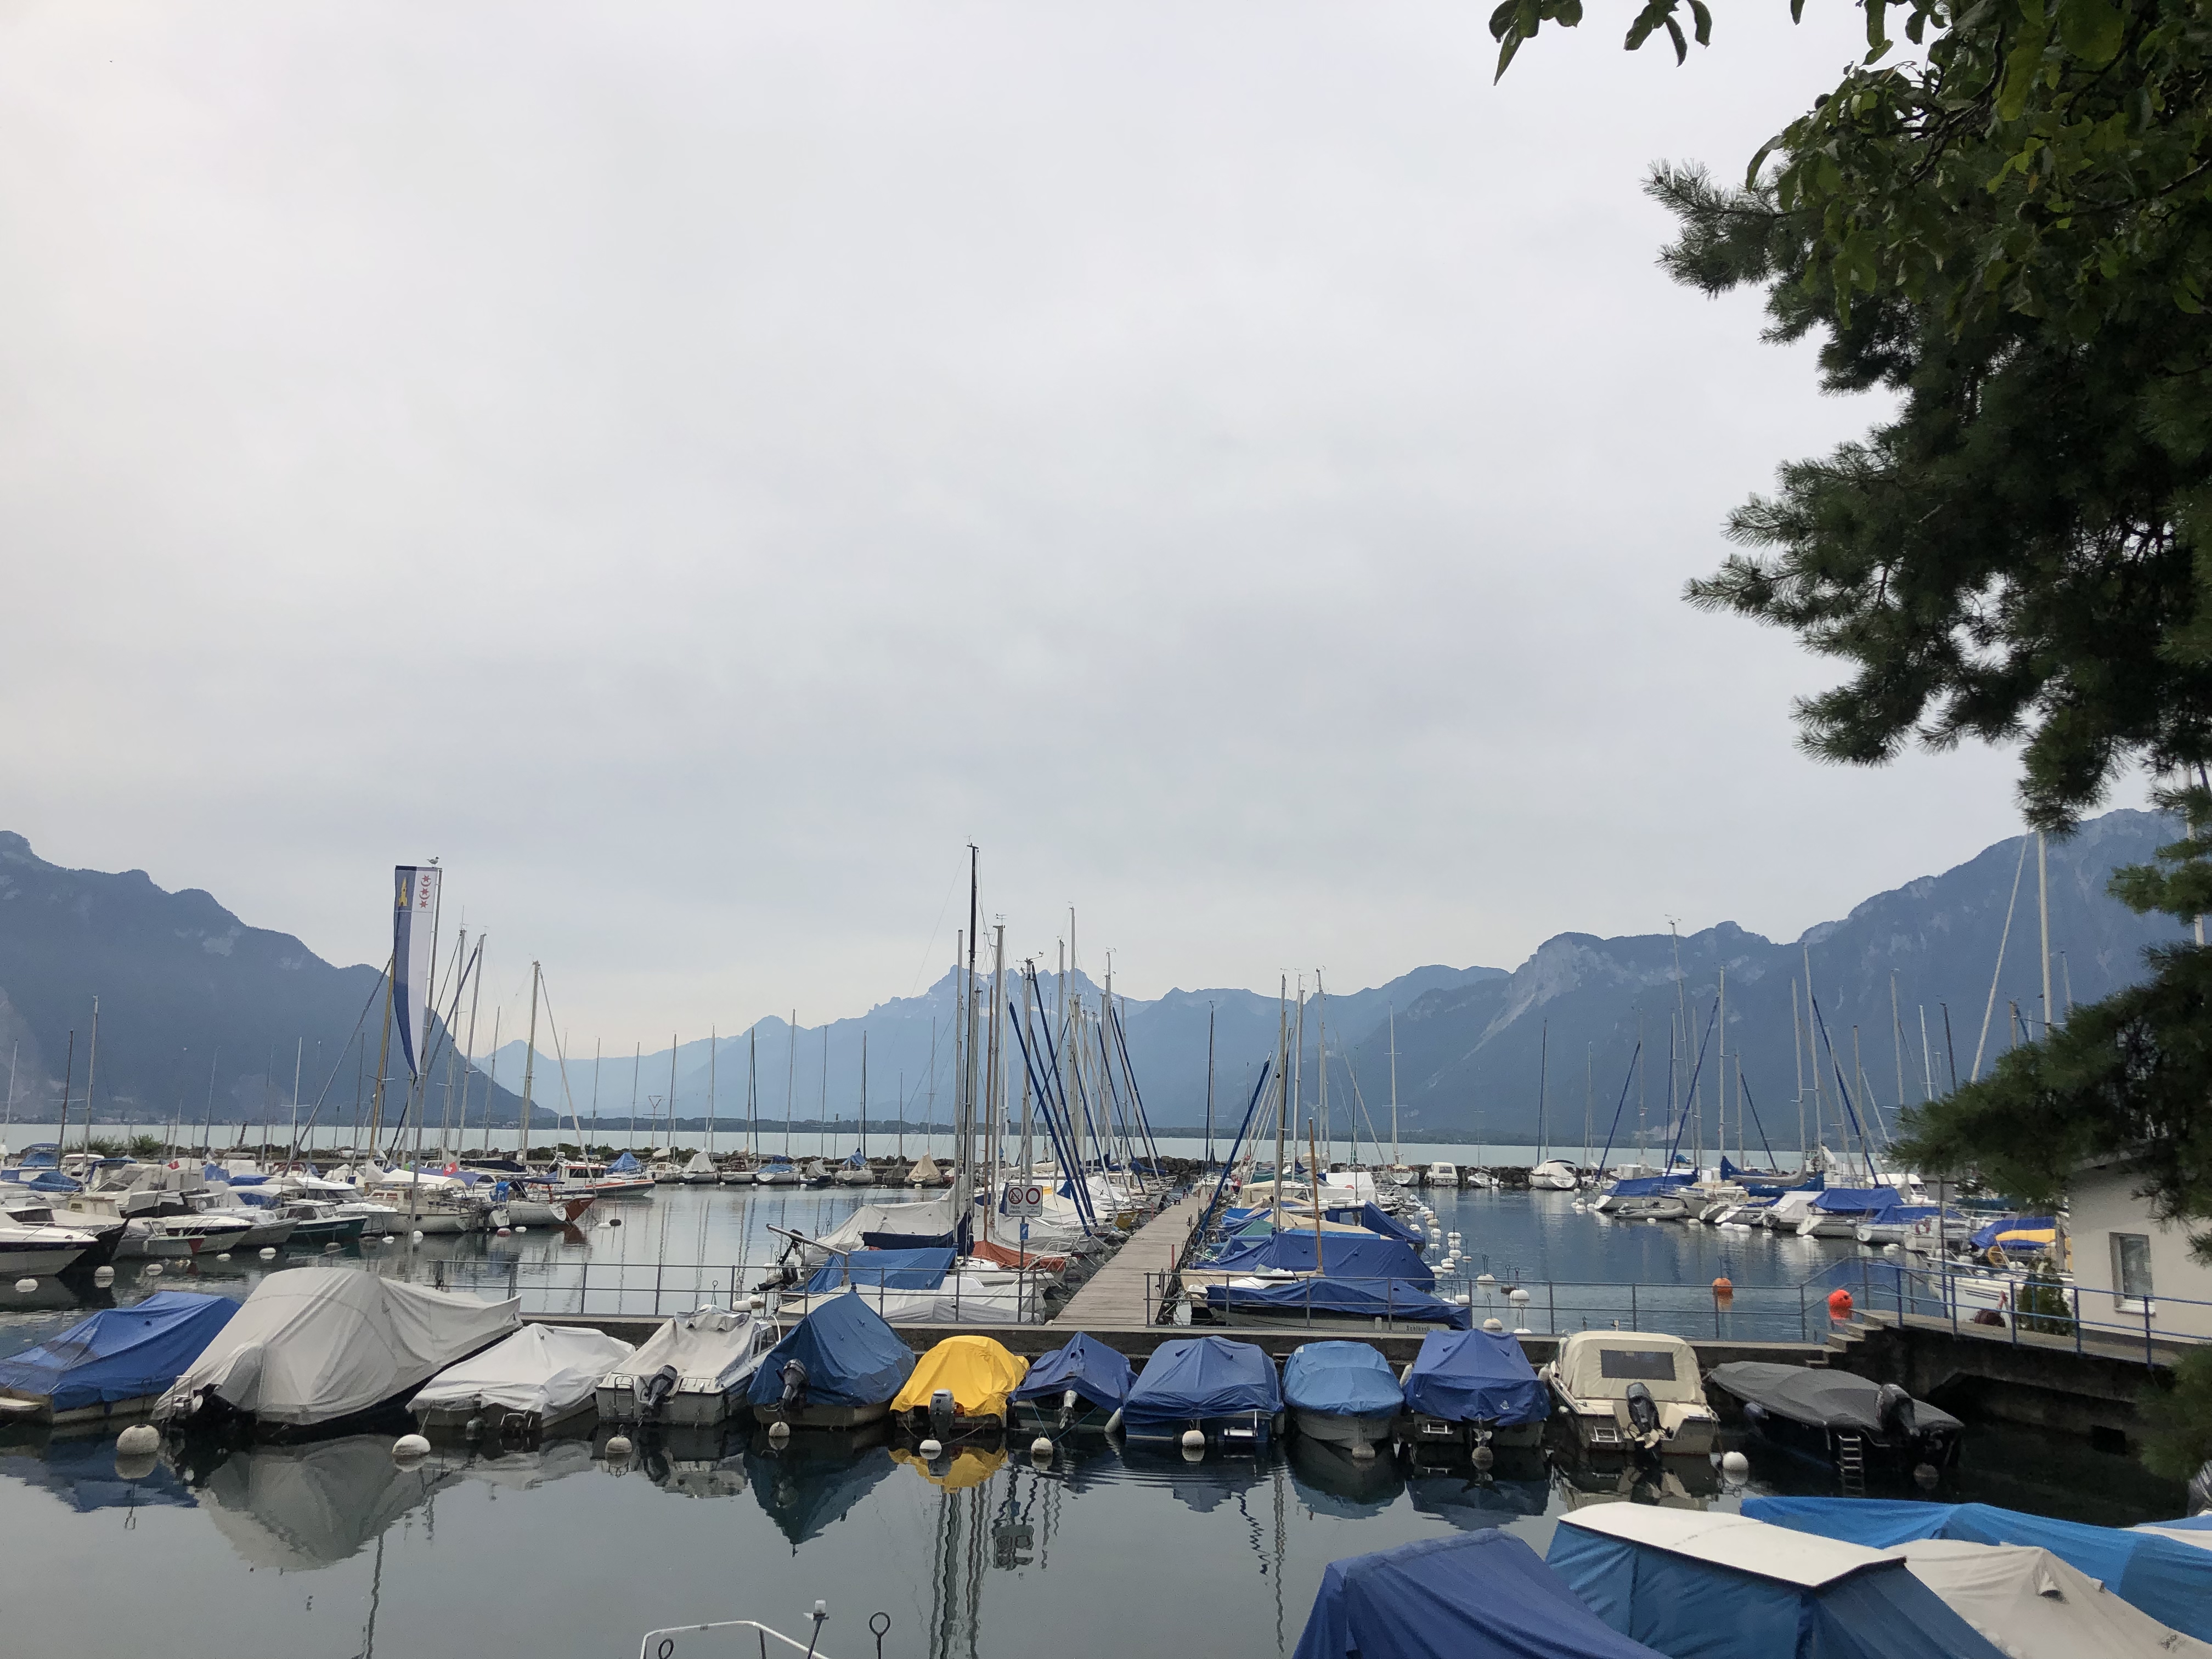 Ships in a harbor in Montreux